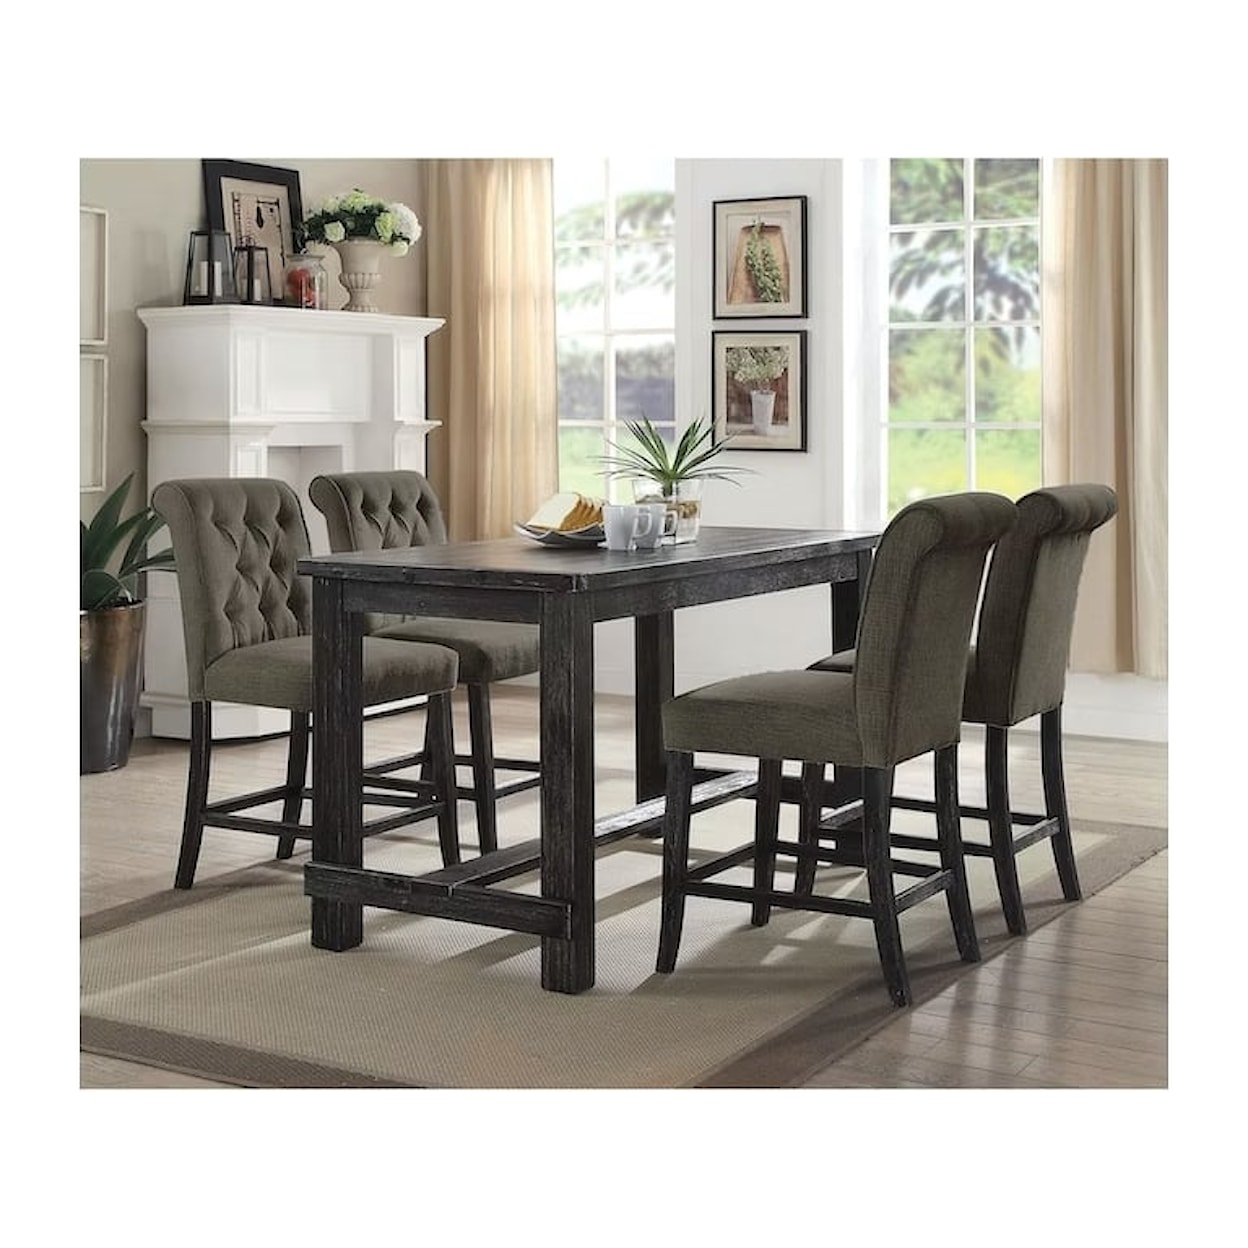 Furniture of America Sania III 5-Piece Counter Height Table and Chair Set